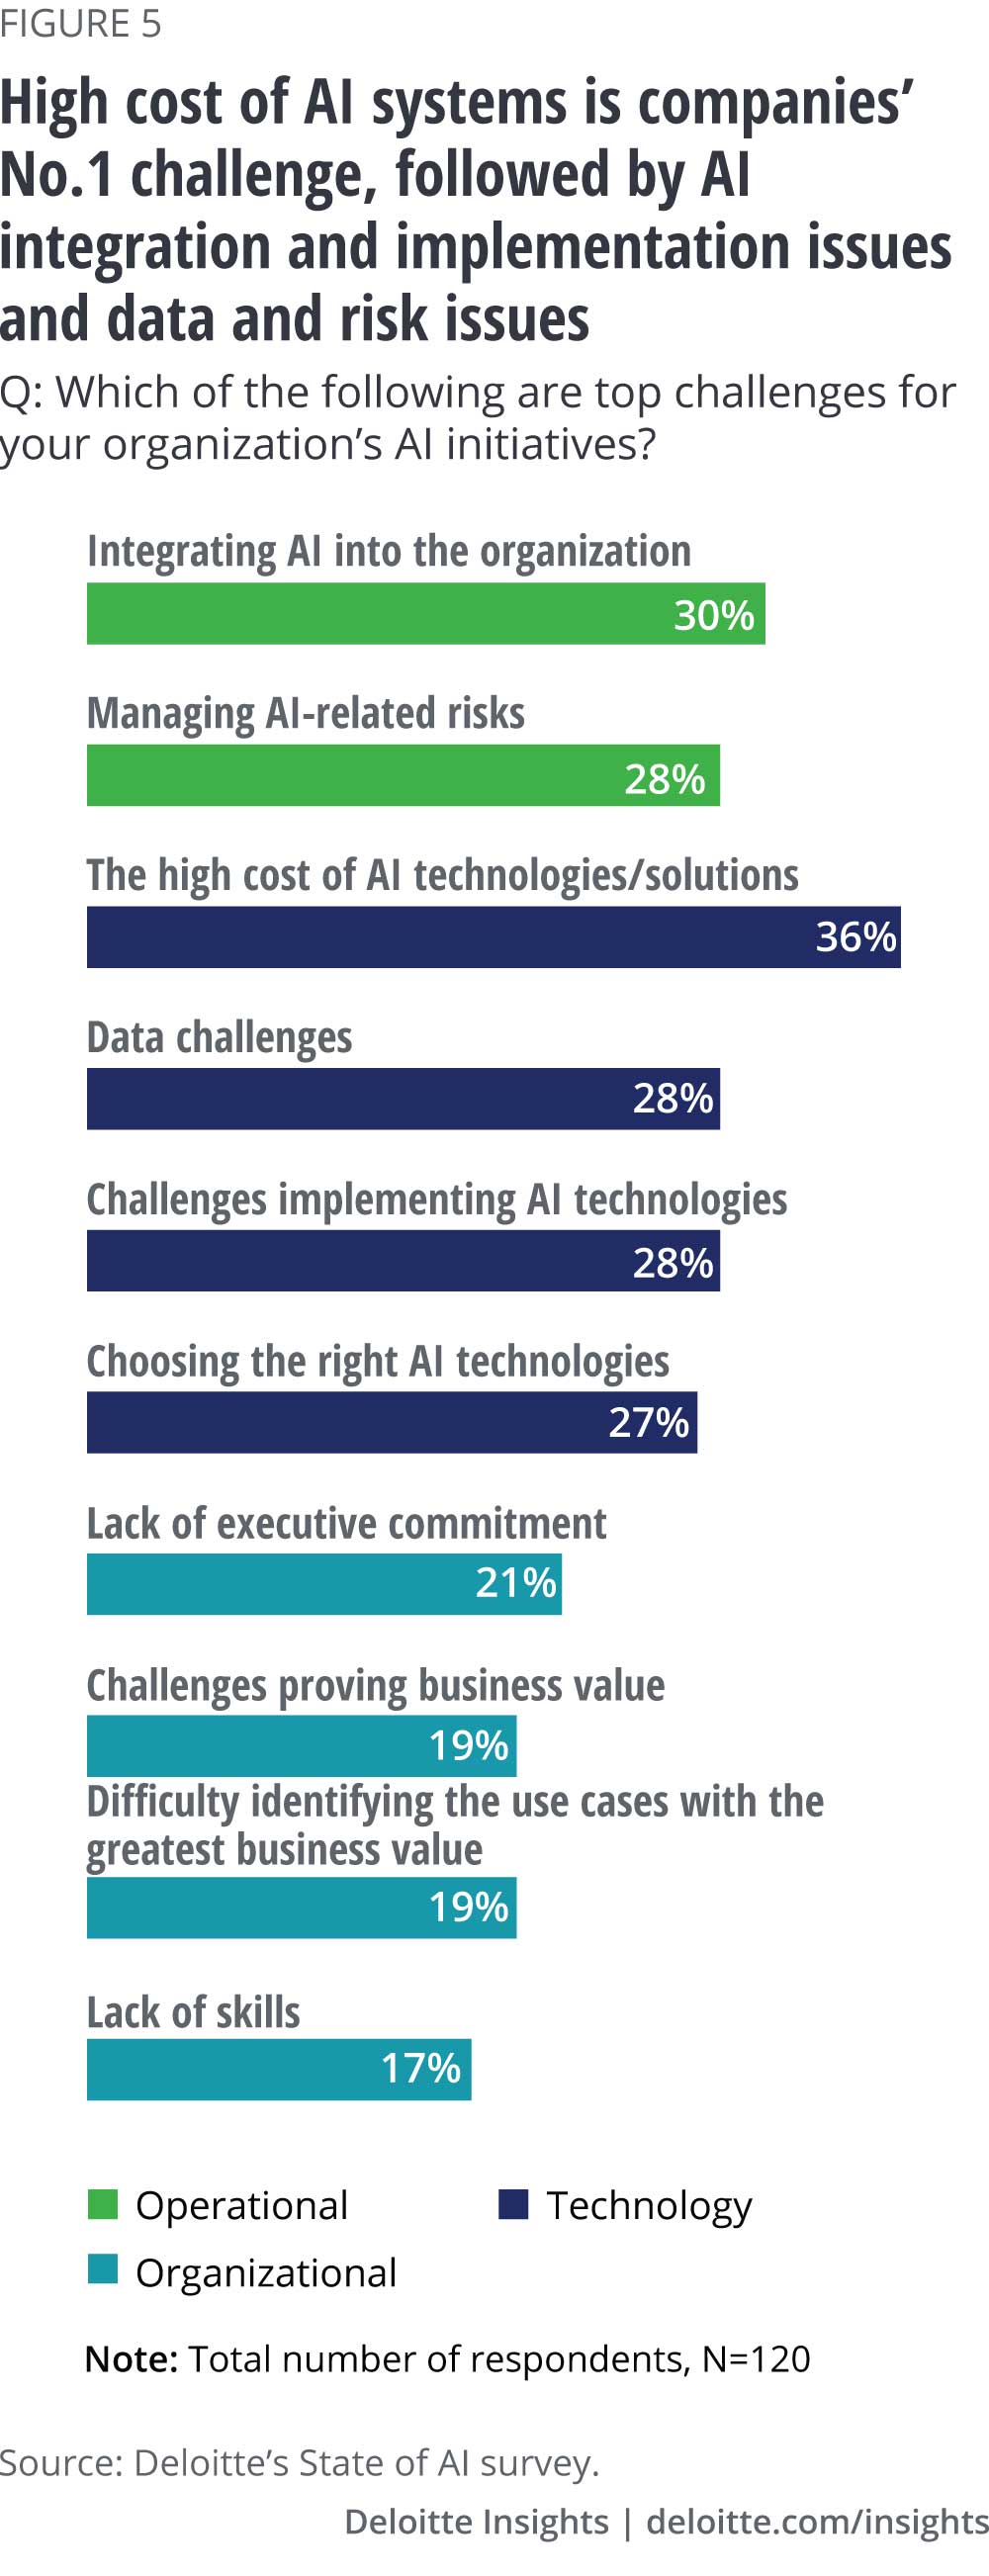 High cost of AI systems is the No. 1 challenge, followed by AI integration and implementation issues, and data and risk issues